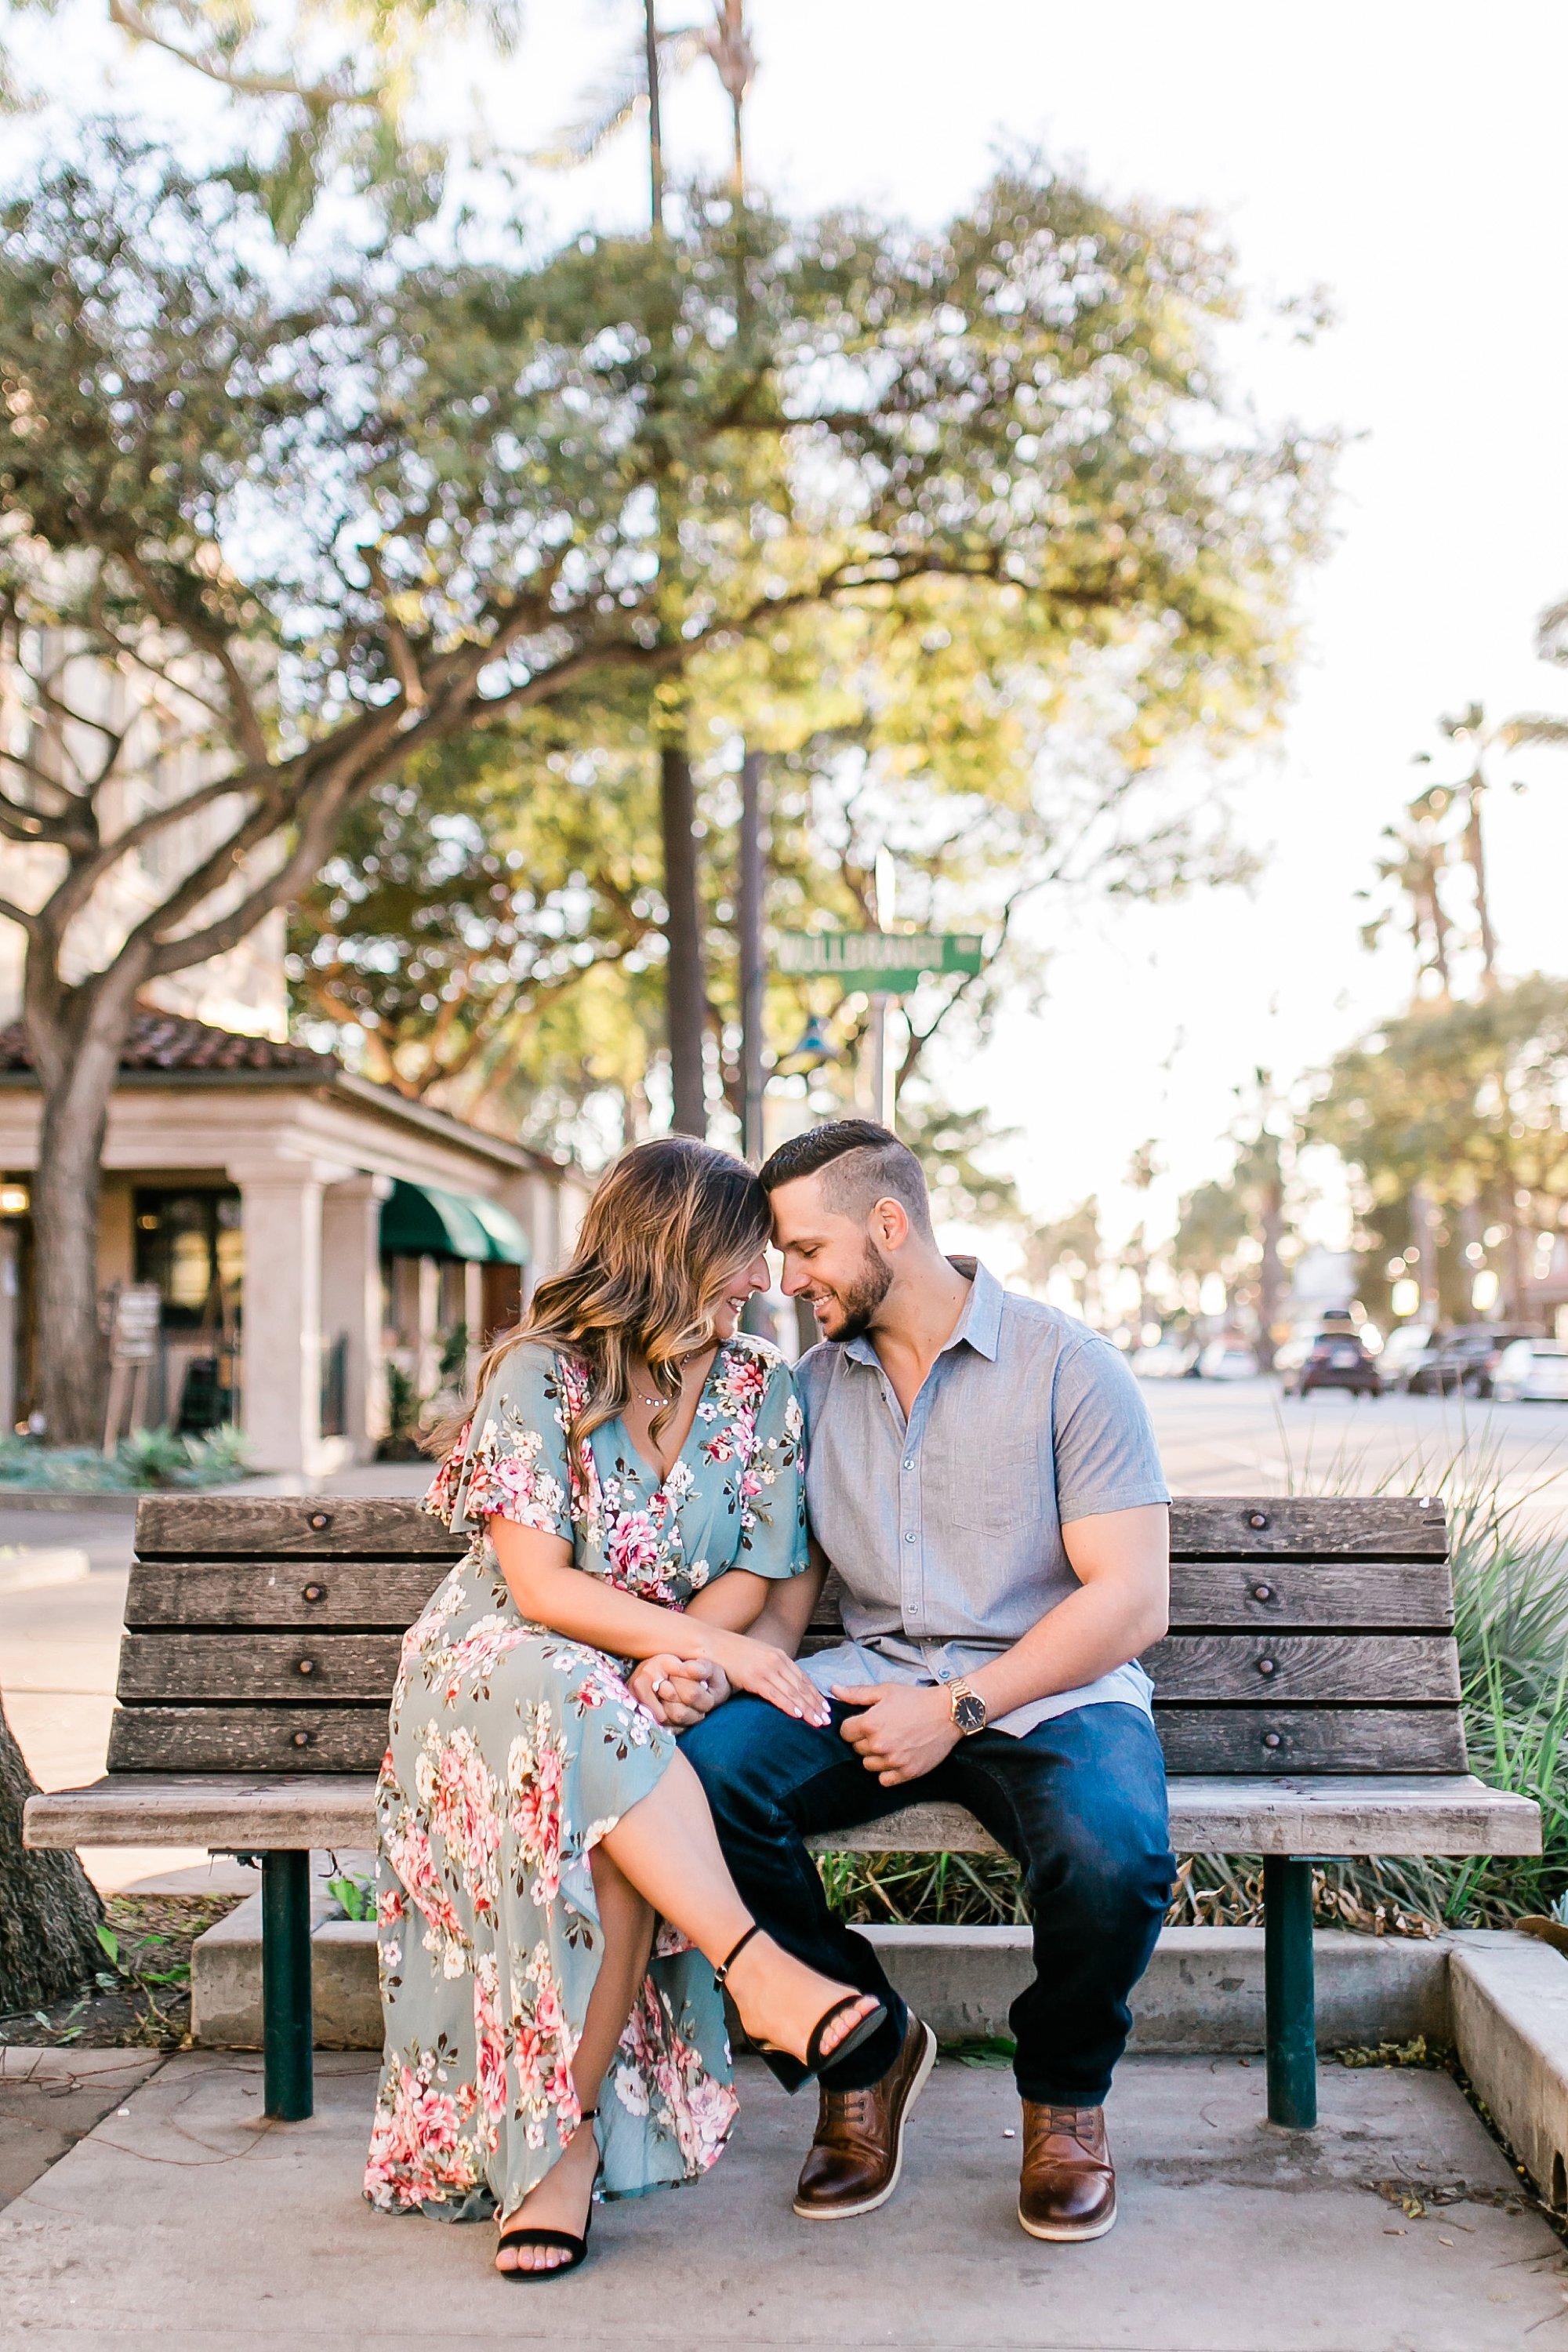  newly engaged couple touching foreheads on the bench 